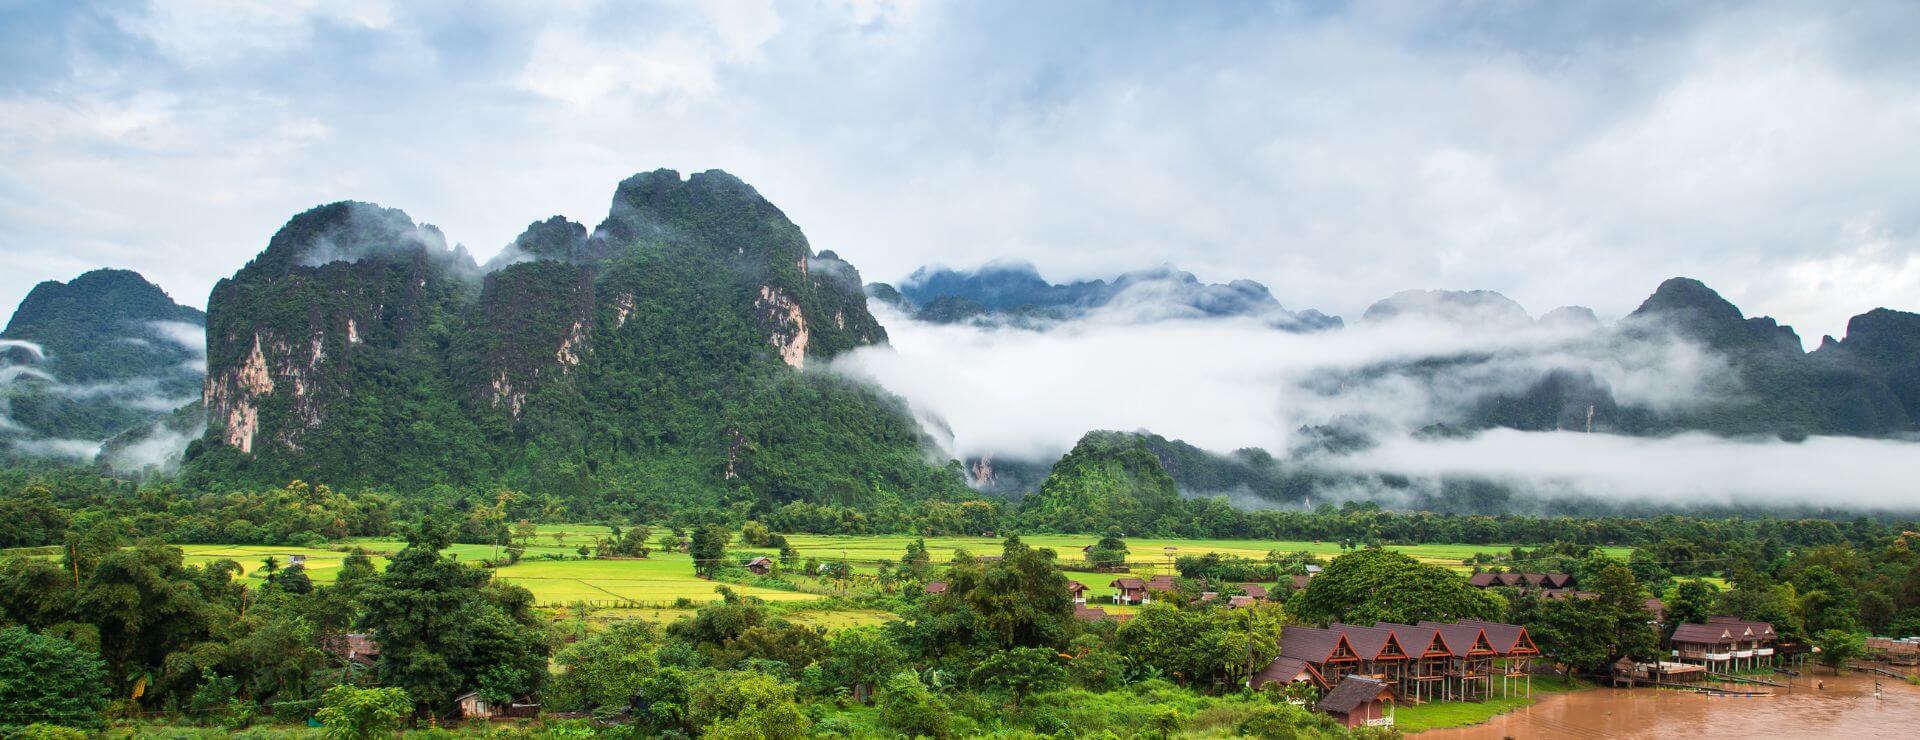 travel to laos requirements